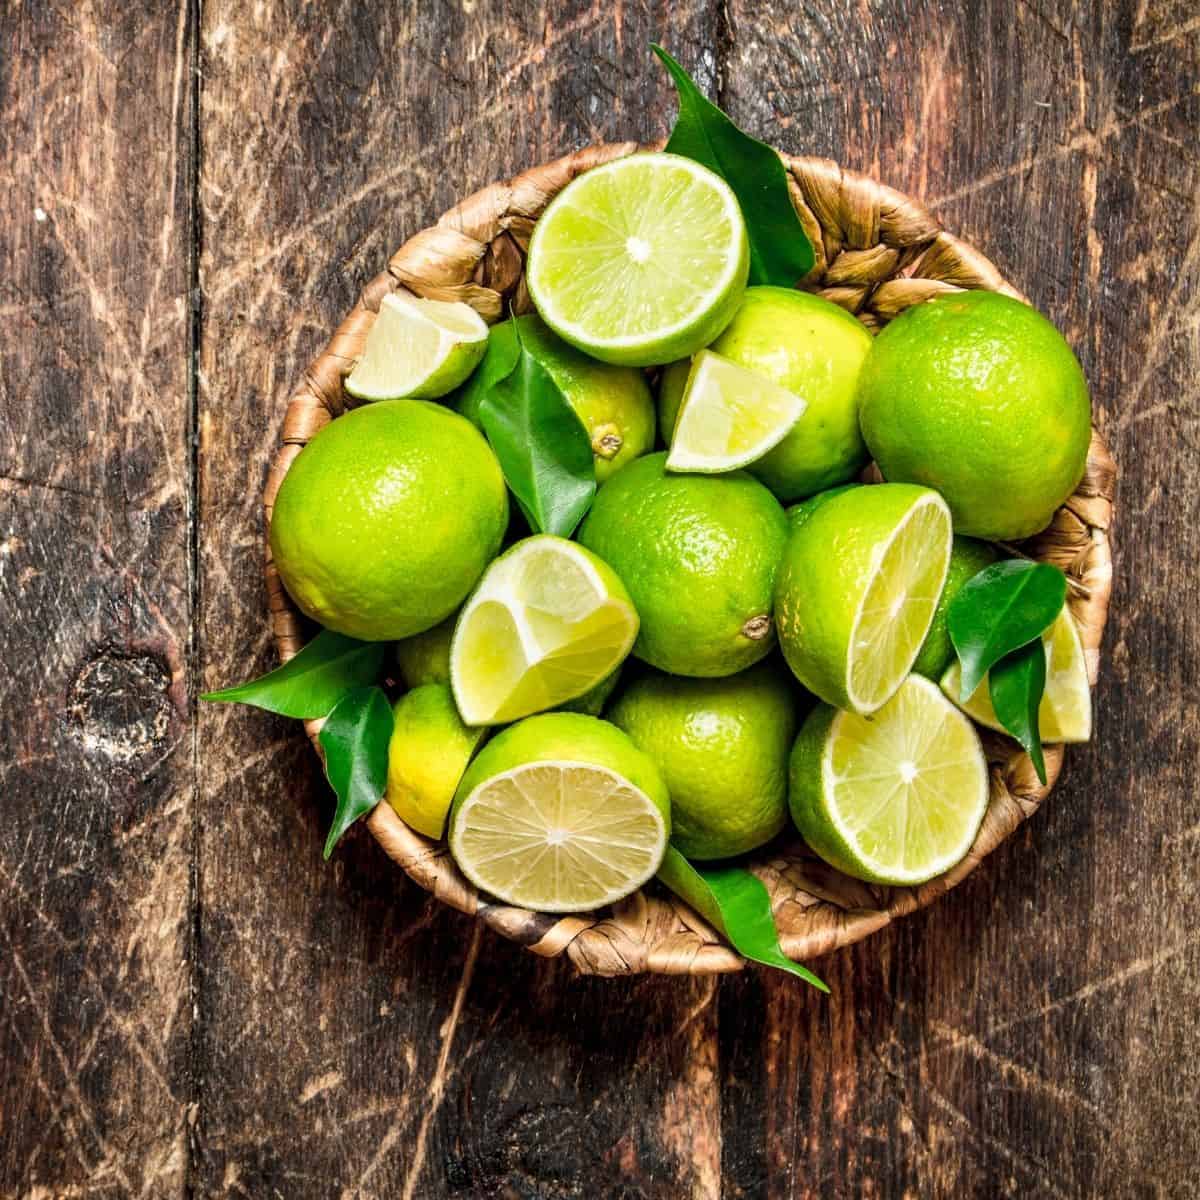 What are limes? Well, they’re not lemons.